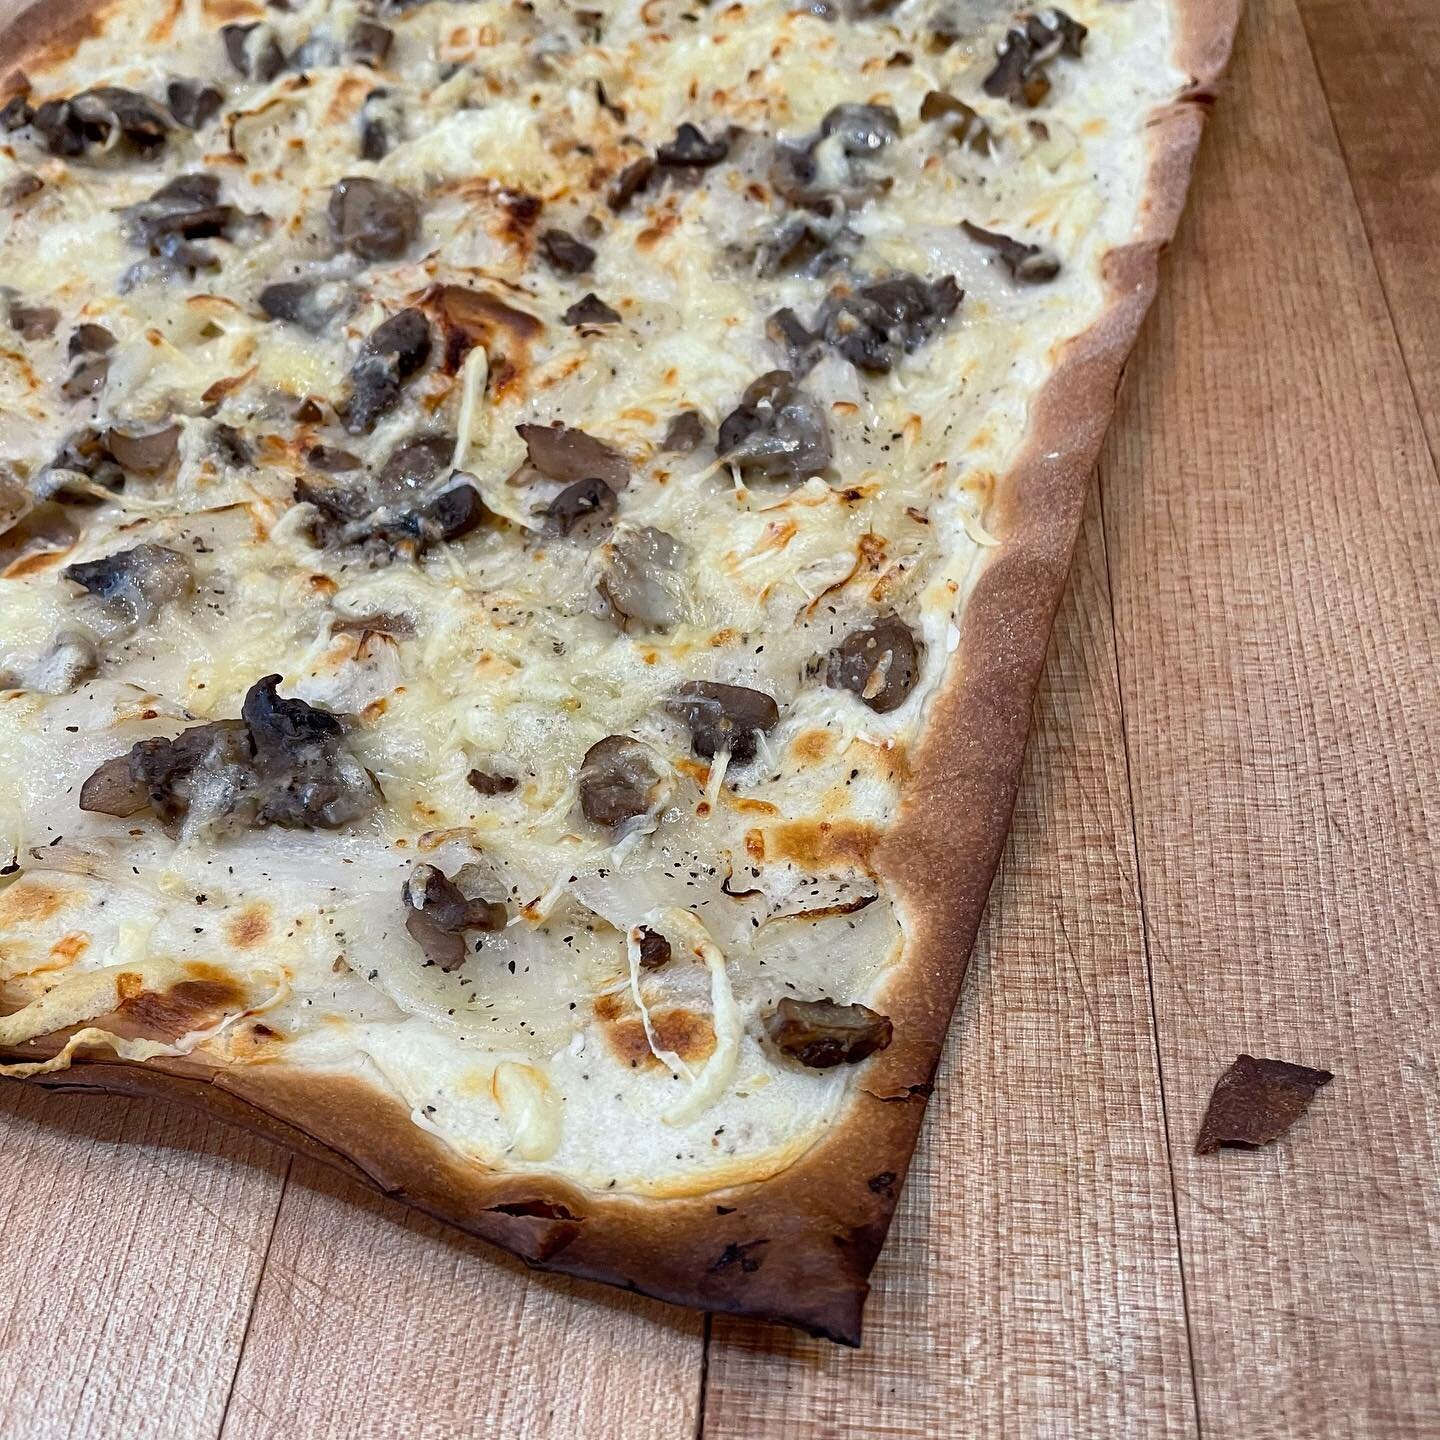 Just trying to stay warm or planning on watching the super bowl, the tarte flamb&eacute;e is the perfect dish for such a cold Sunday! Pictured is the new version now available: creme fraiche, onions, comte cheese, and mushrooms. It is vegetarian and 